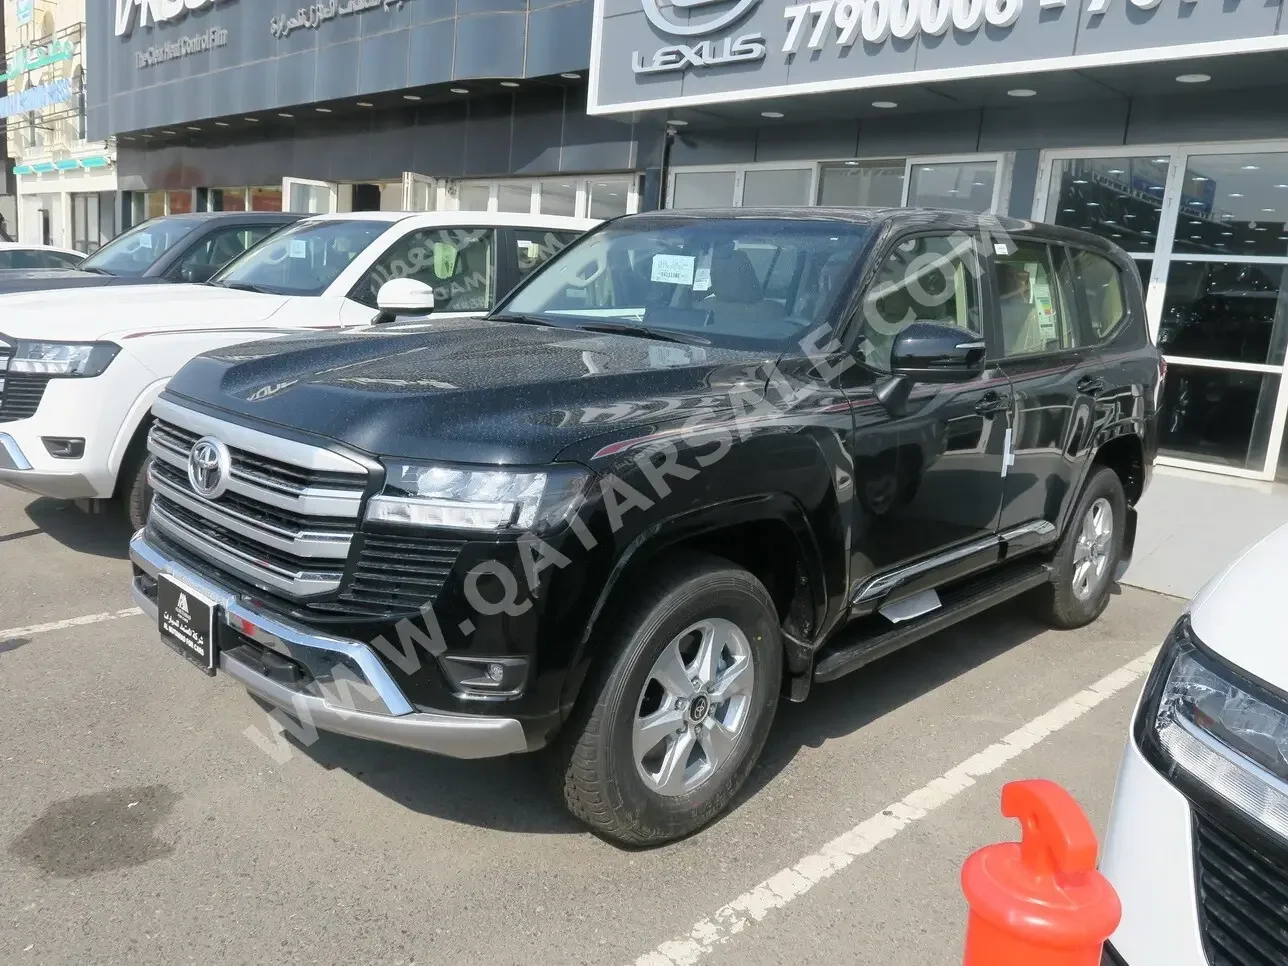 Toyota  Land Cruiser  GXR- Grand Touring  2024  Automatic  0 Km  6 Cylinder  Four Wheel Drive (4WD)  SUV  Black  With Warranty